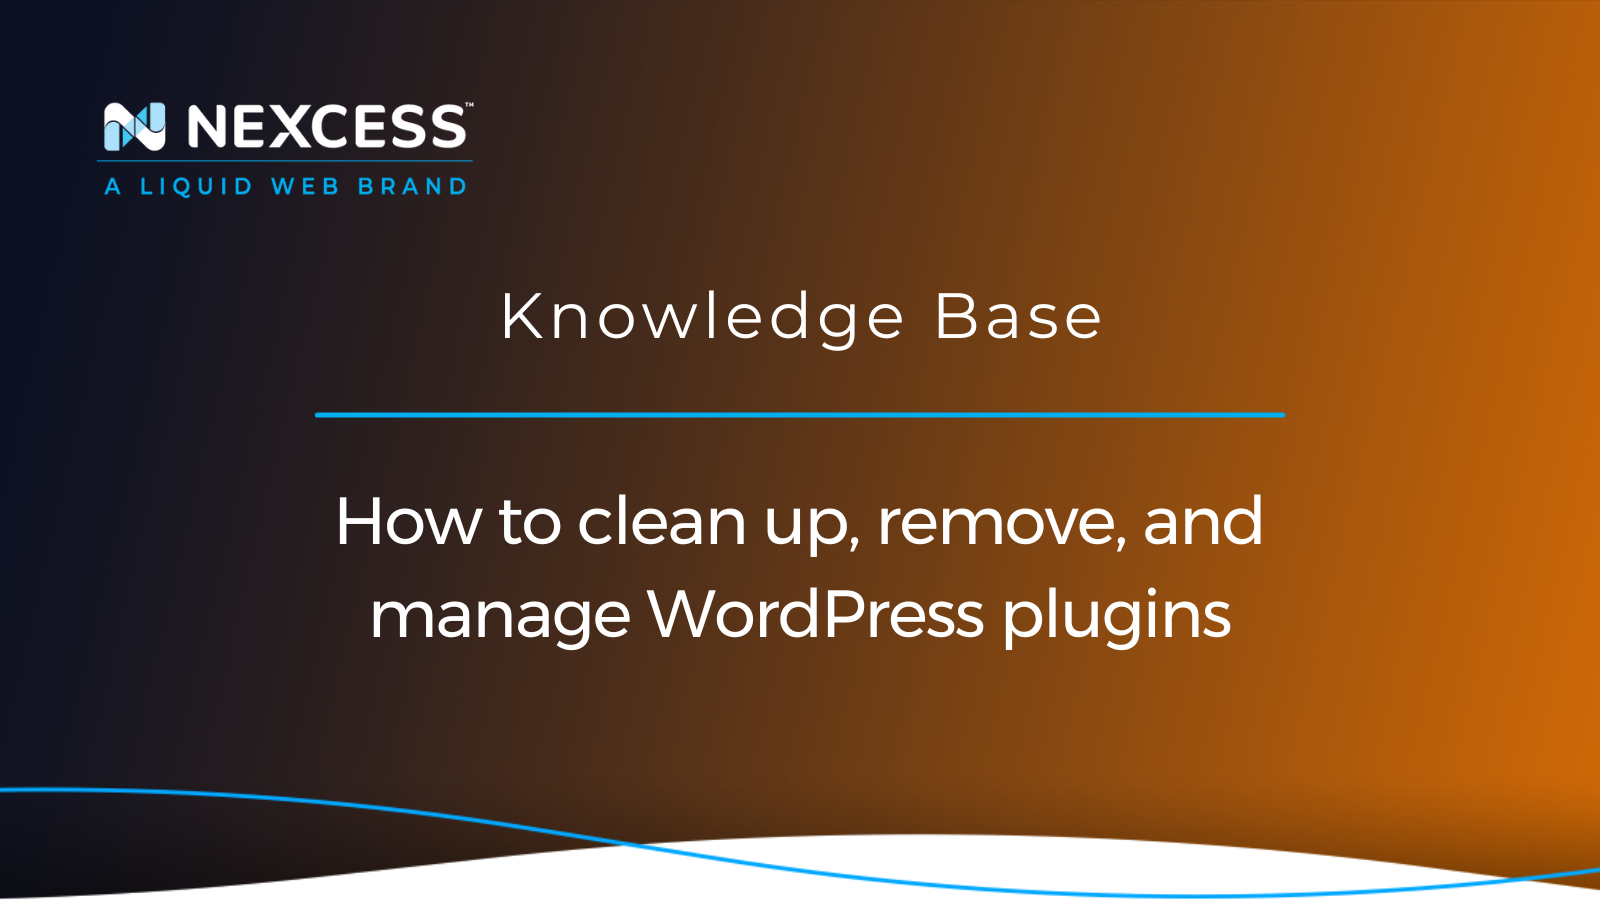 How to clean up, remove, and manage WordPress plugins